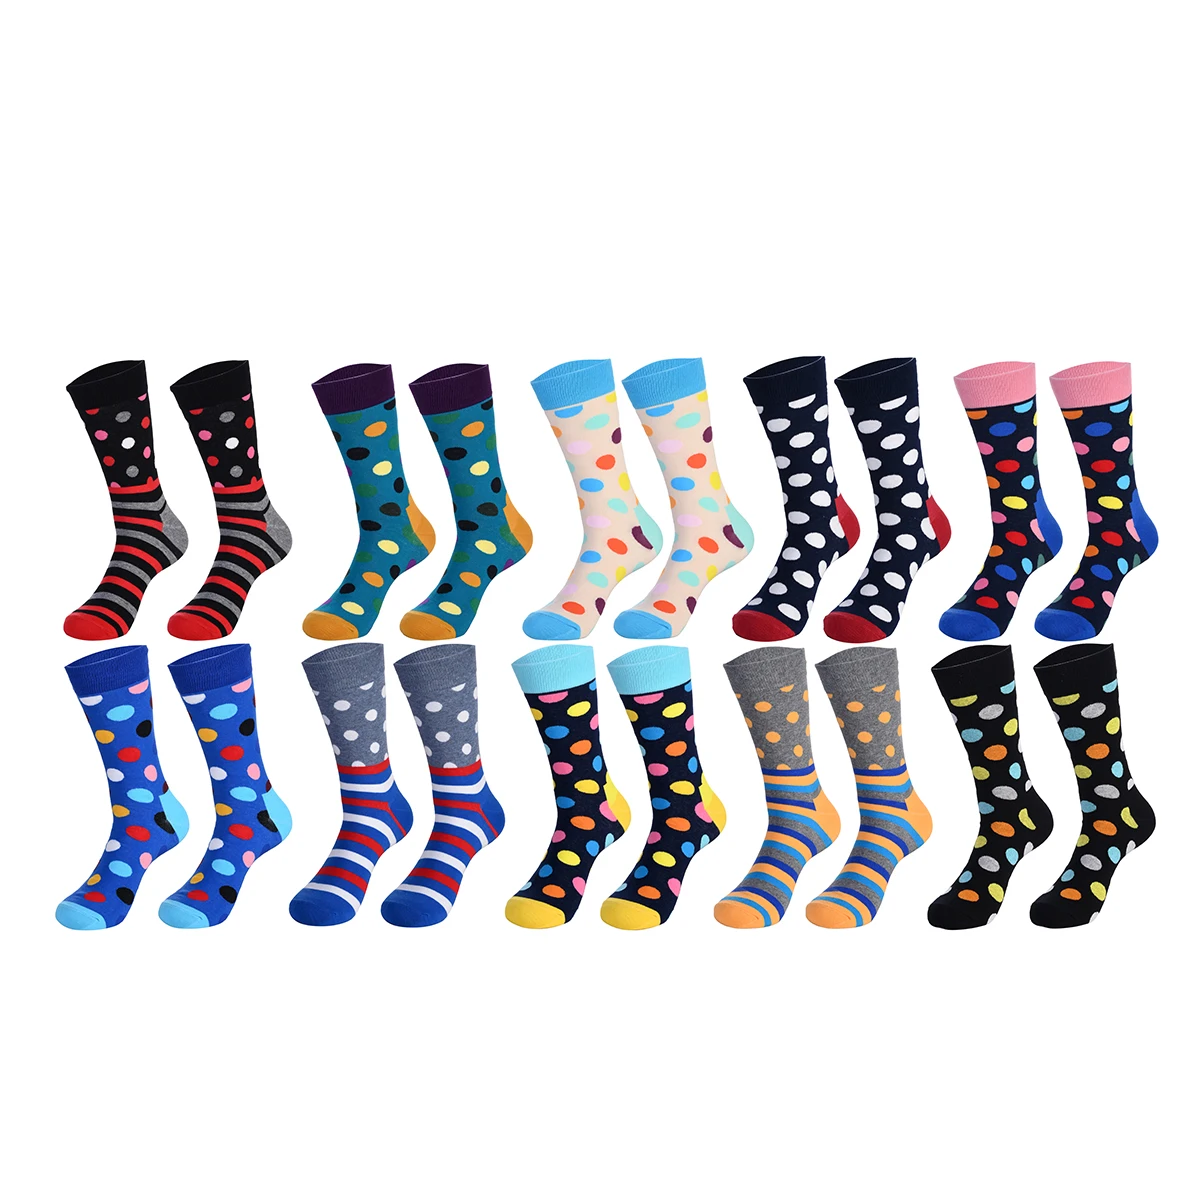 10 pairs of high quality cotton polka dot socks for men and women winter skating funny socks high sports casual socks